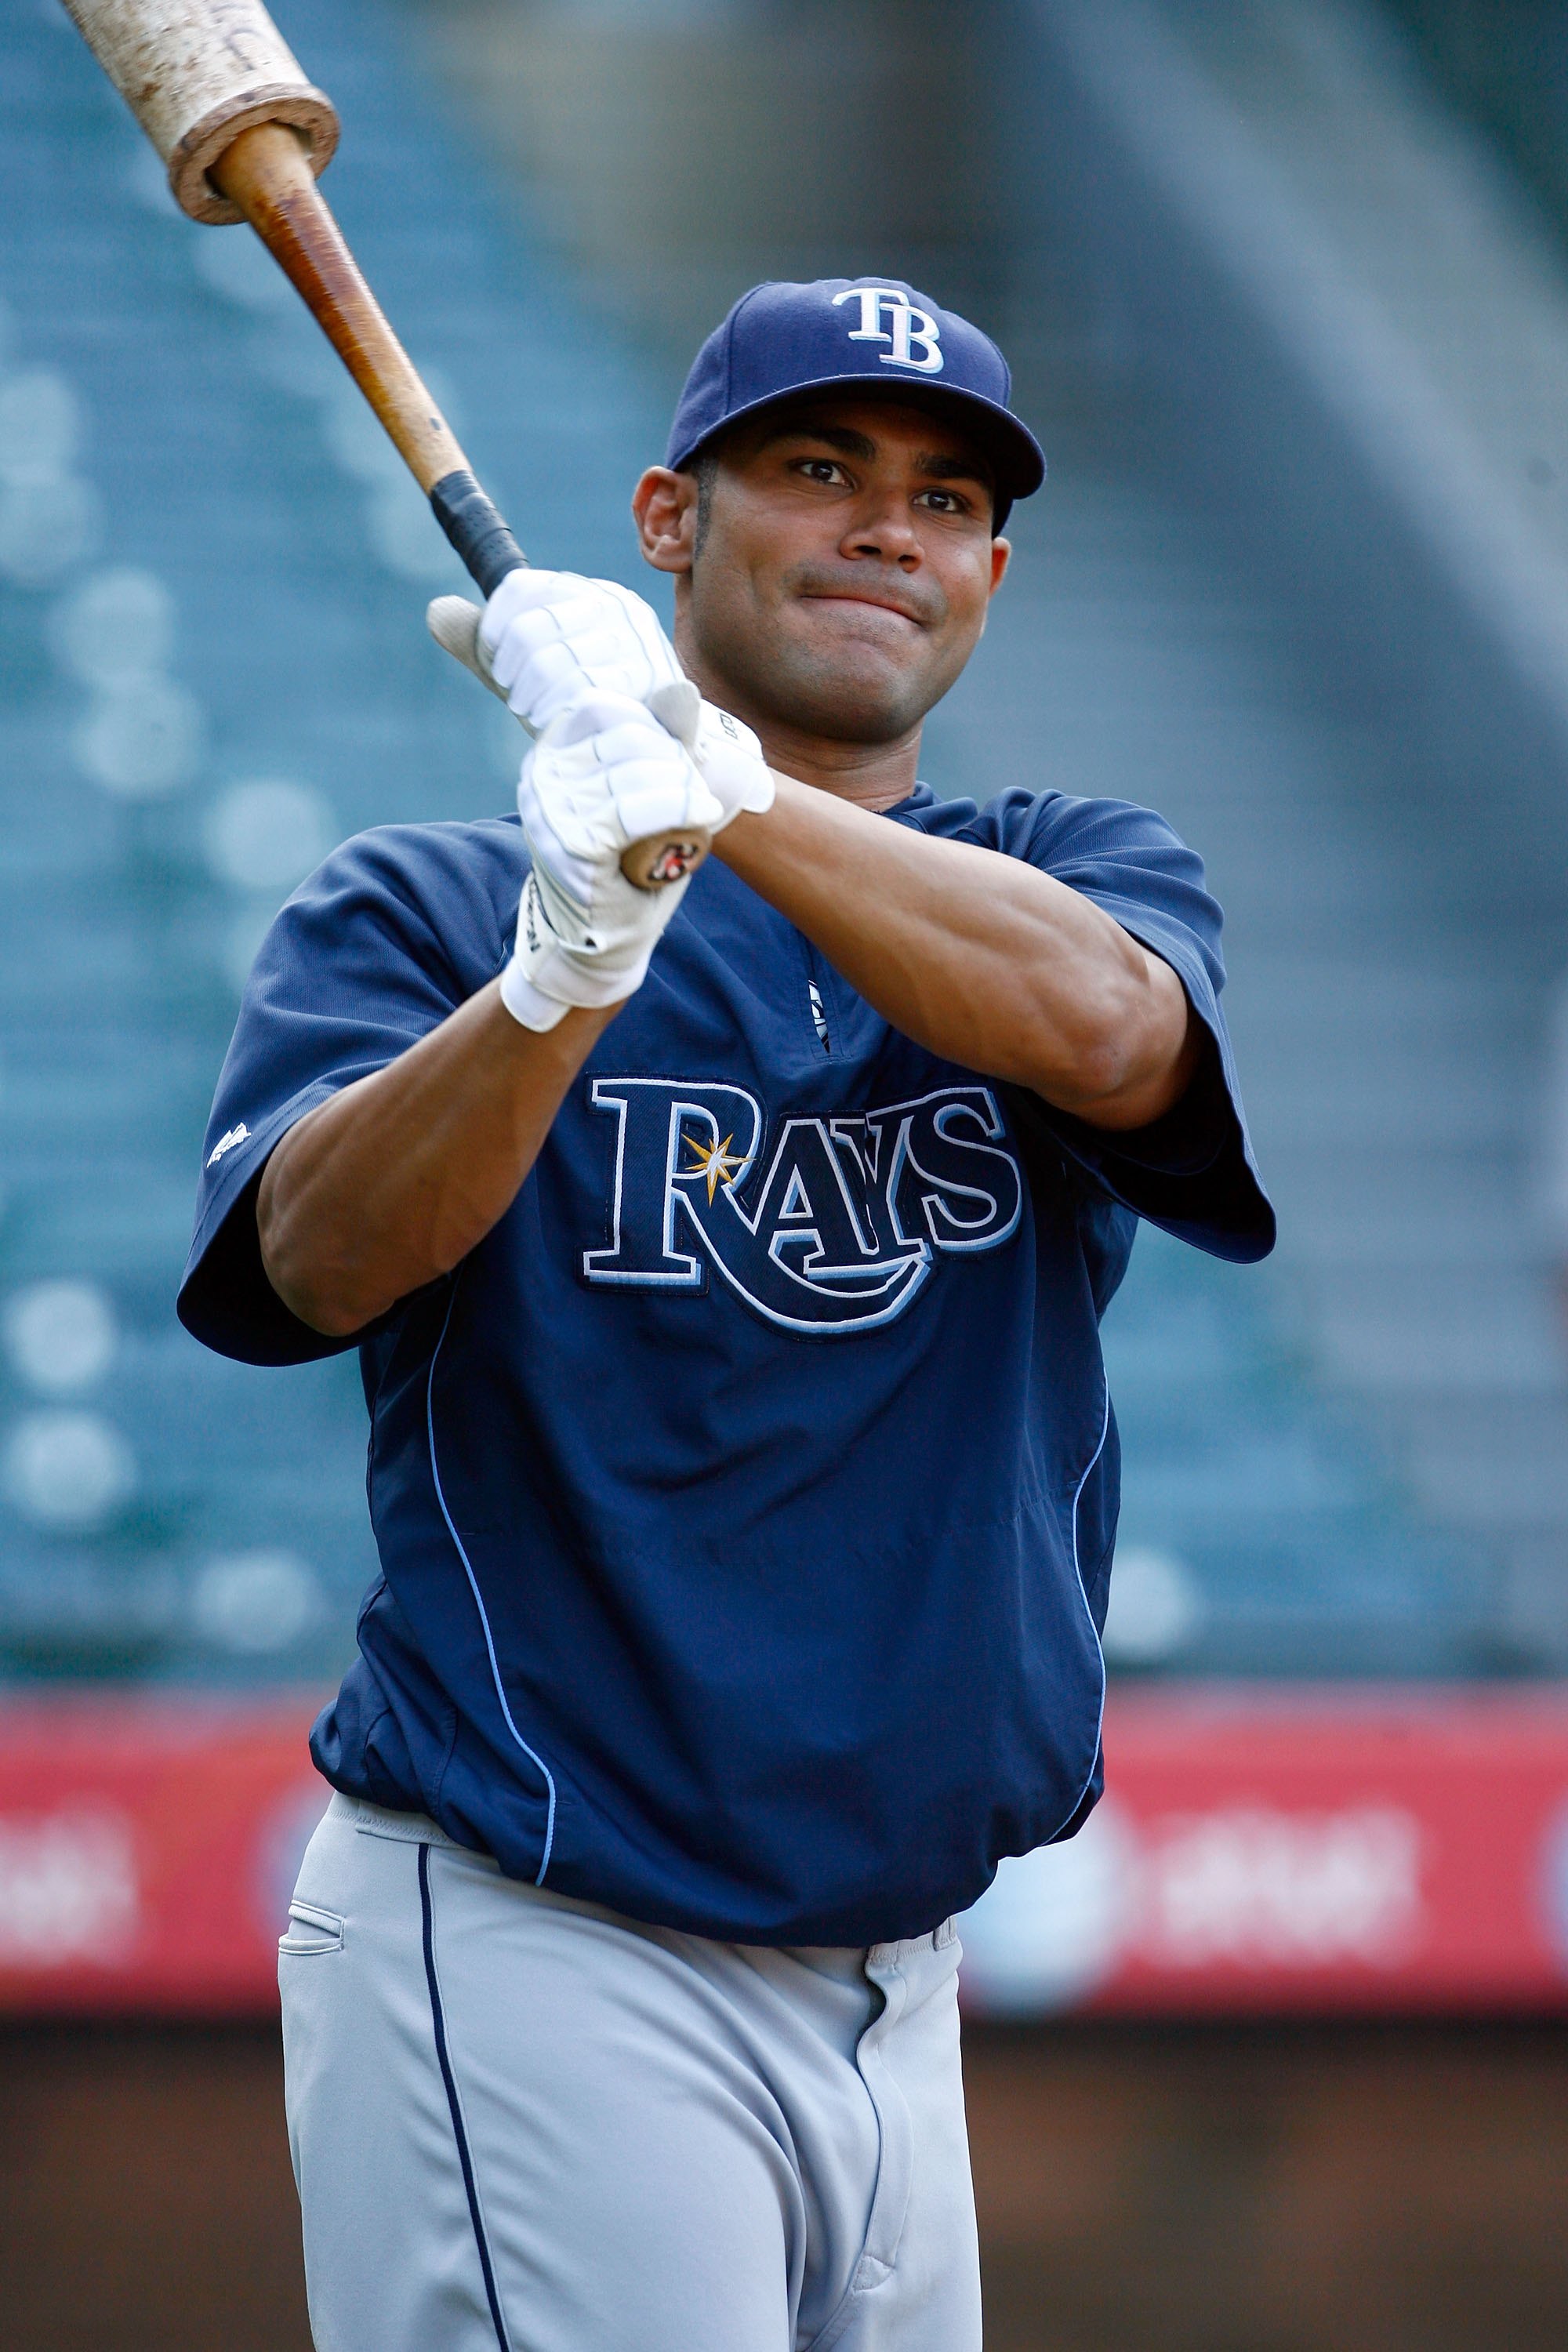 ANAHEIM, CA - AUGUST 10:  Carlos Pena #23 of the Tampa Bay Rays looks on during batting practice prior to the game against the Los Angeles Angels of Anaheim at Angel Stadium on August 10, 2009 in Anaheim, California.  (Photo by Jeff Gross/Getty Images)